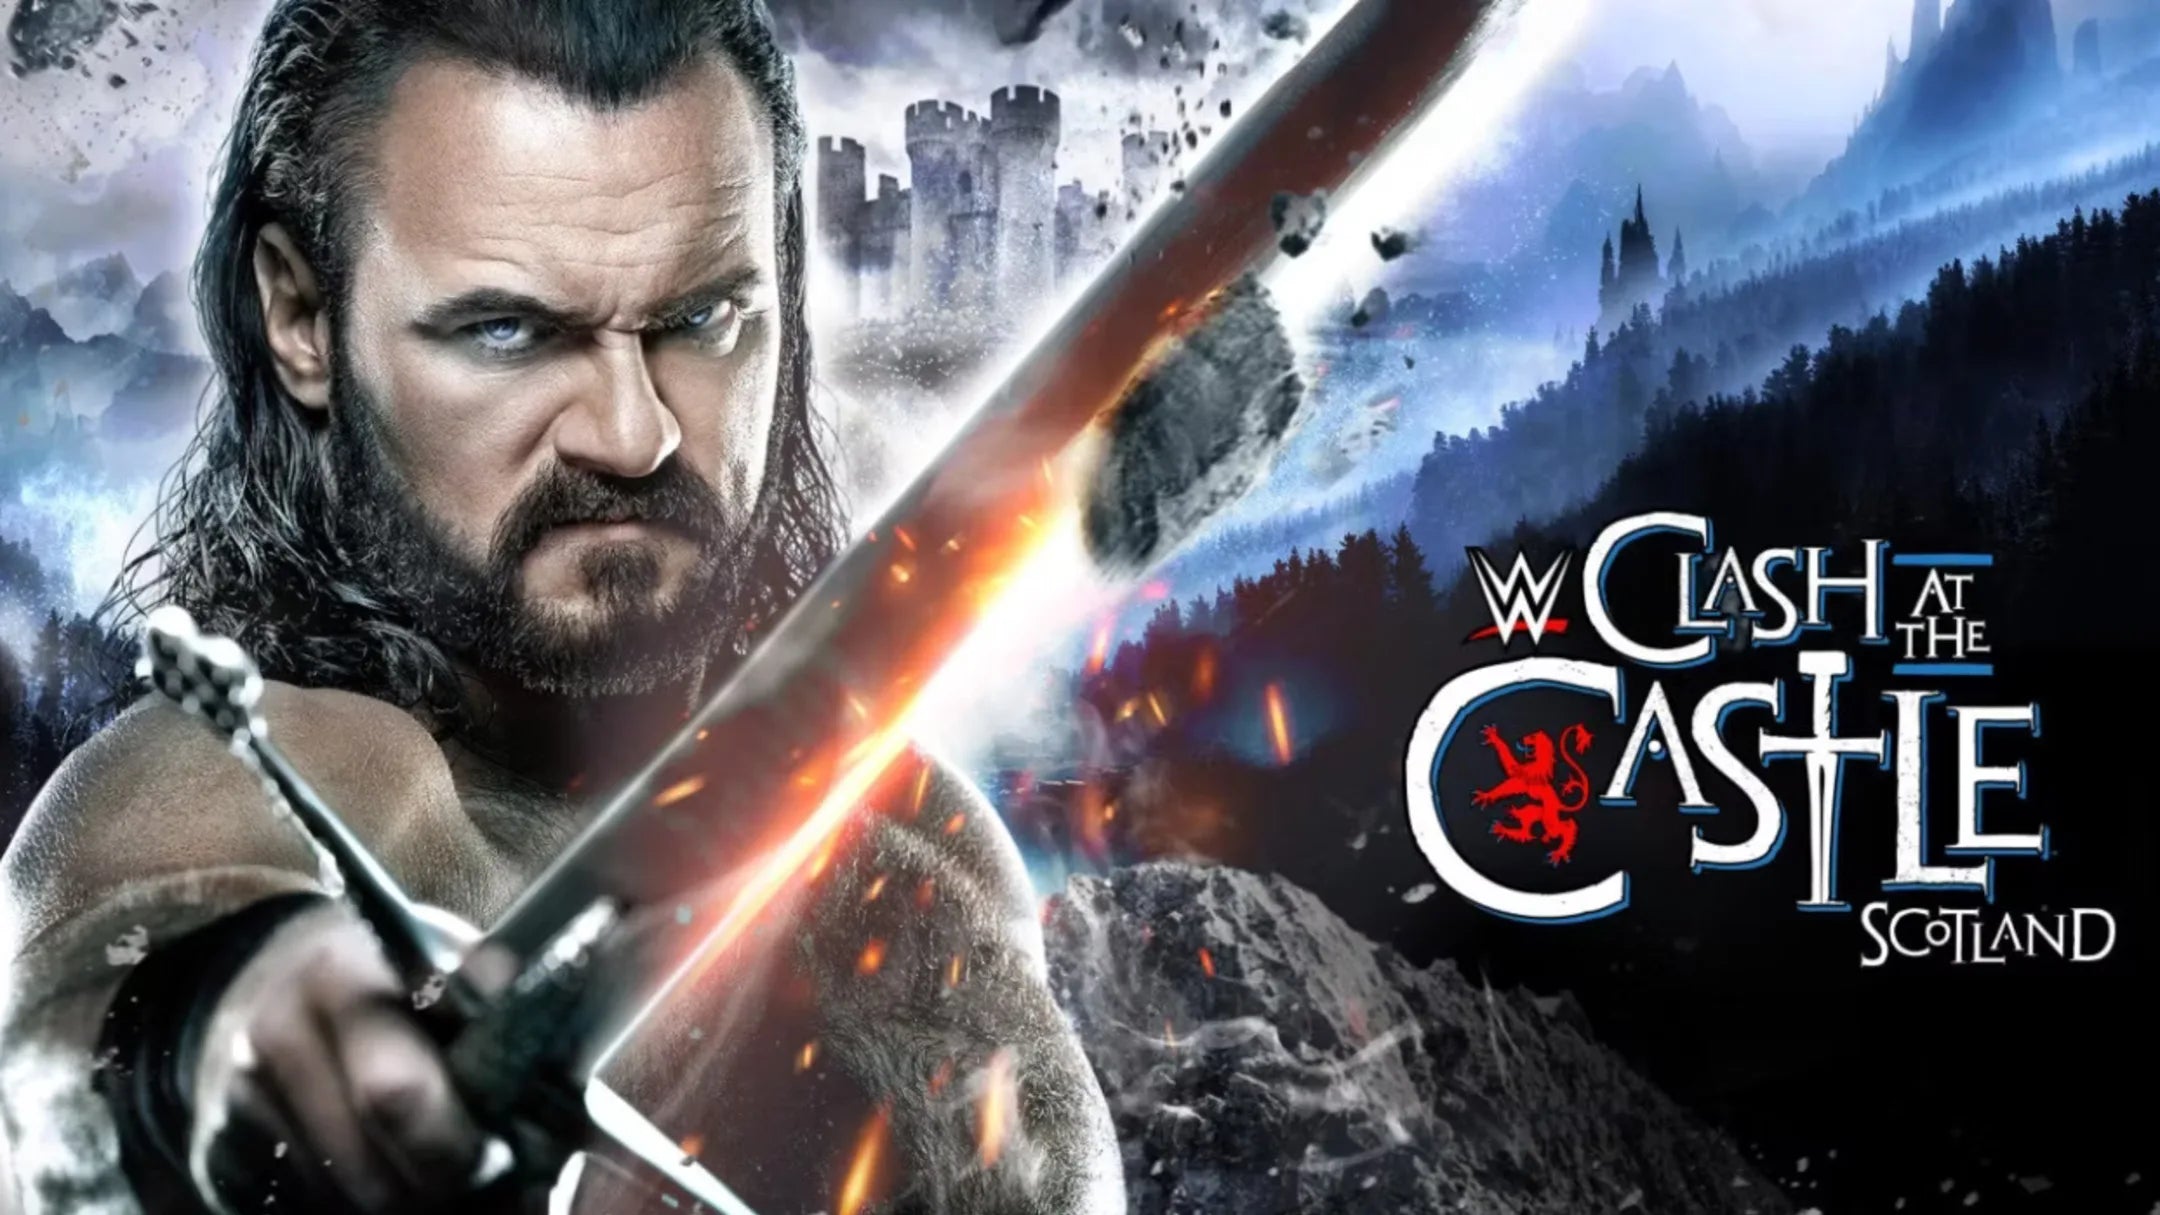 Poster for Clash at the Castle: Scotland featuring Drew McIntyre